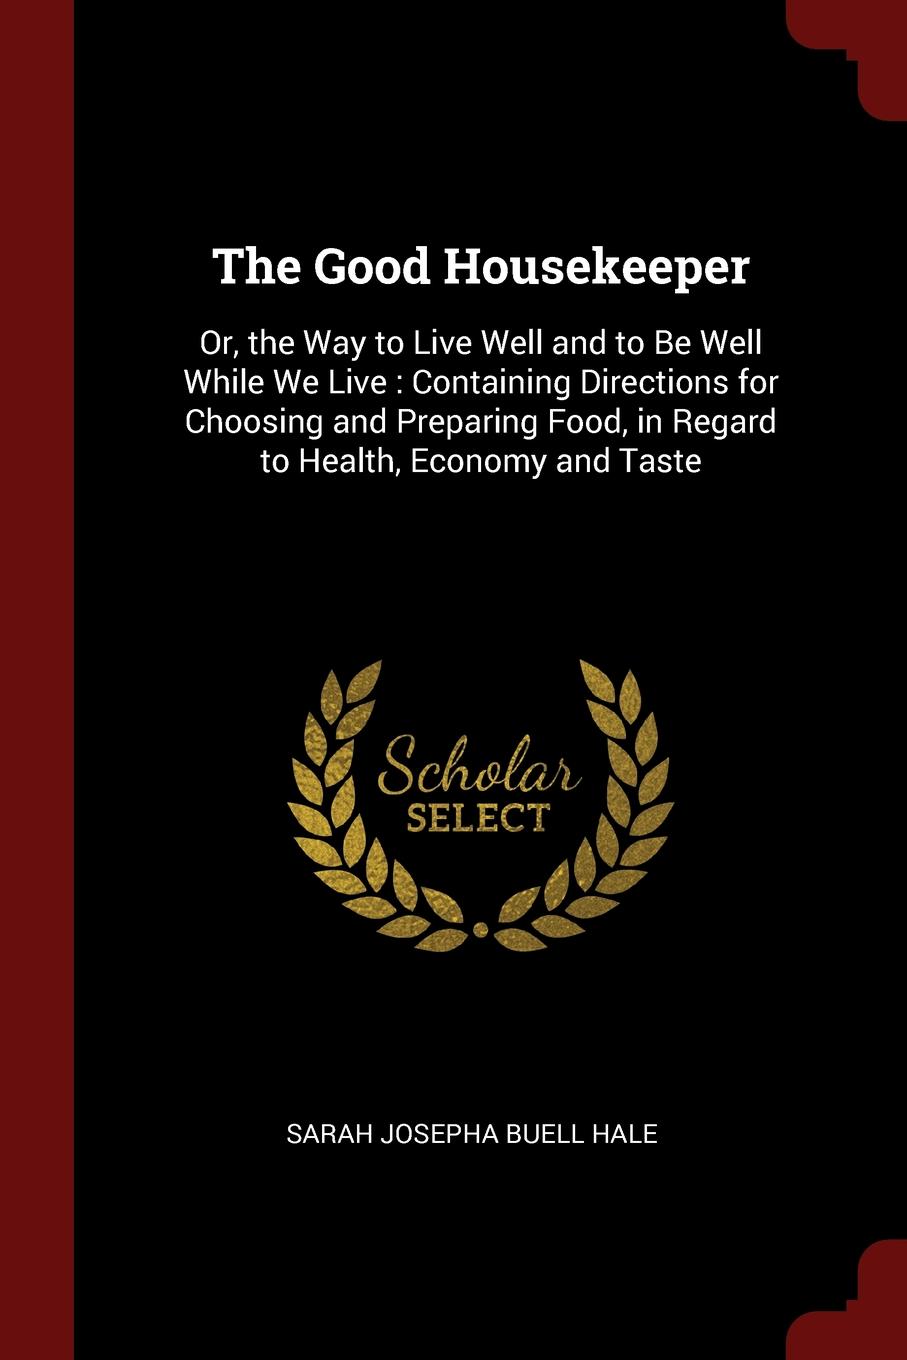 The Good Housekeeper. Or, the Way to Live Well and to Be Well While We Live : Containing Directions for Choosing and Preparing Food, in Regard to Health, Economy and Taste